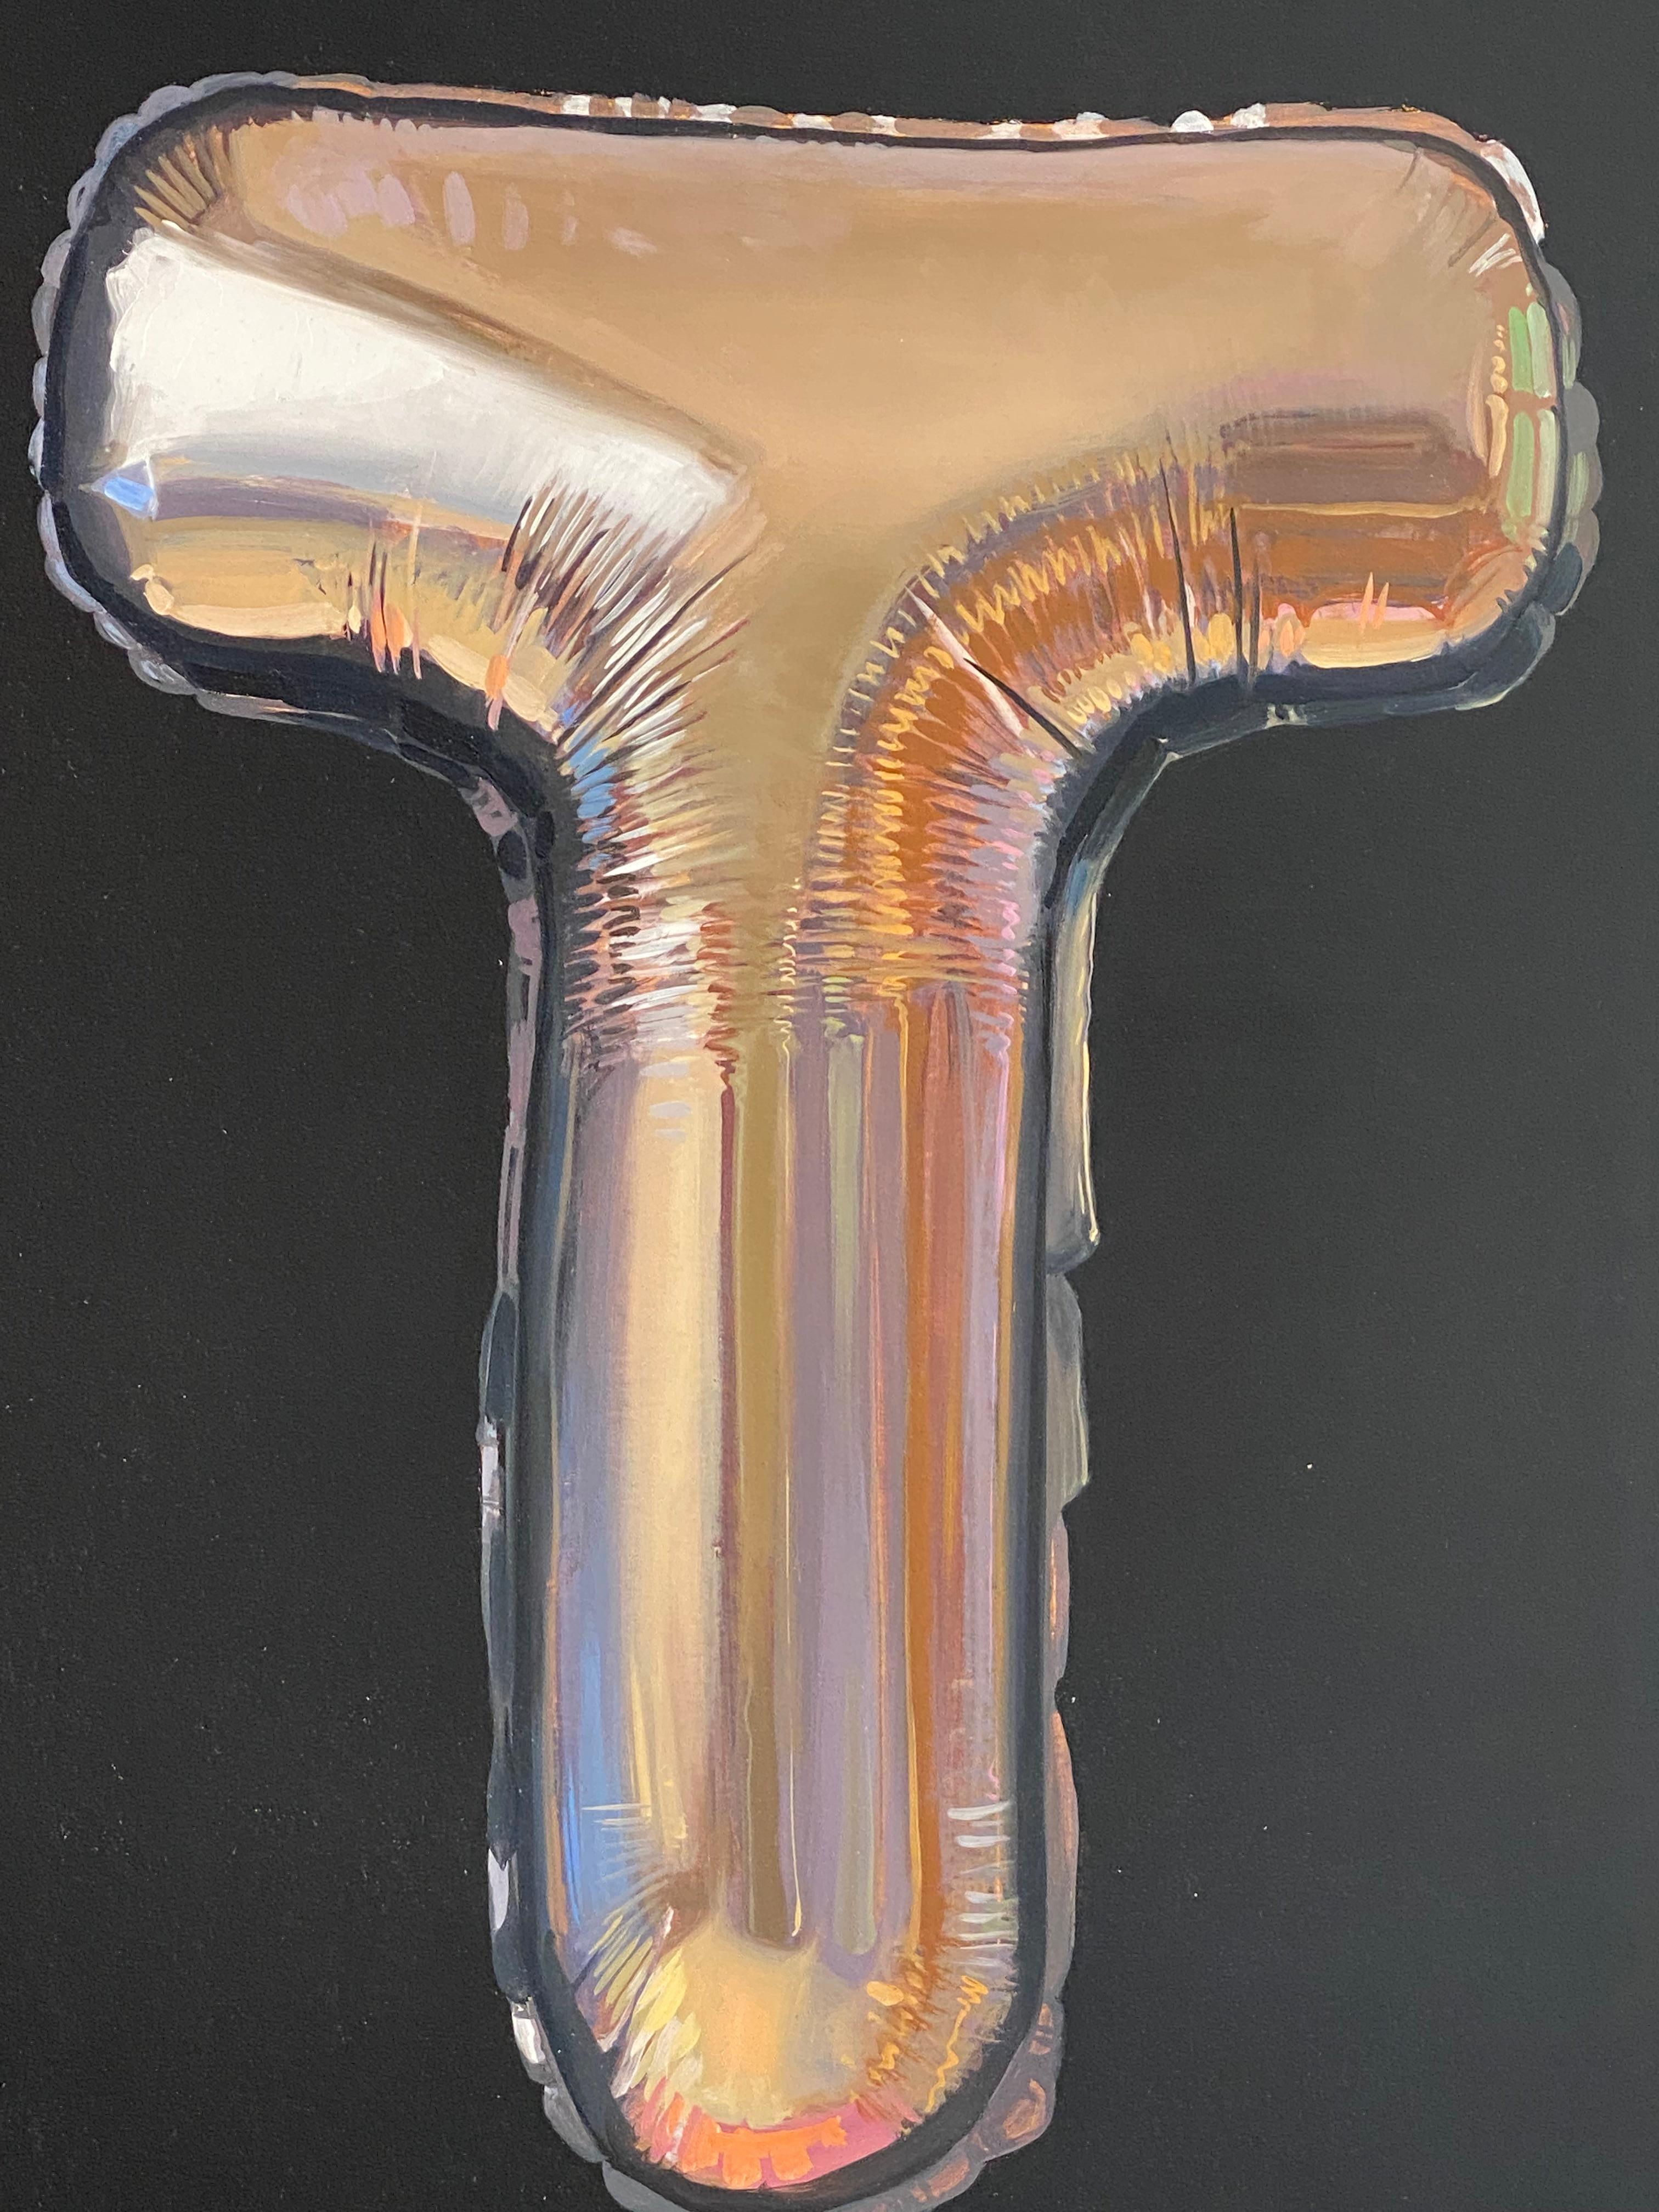 Rutger Hiemstra 
Attempted Art
Oil on wood panel
53 x 125 cm

Dutch artist Rutger Hiemstra (1975) understands the art of painting from observation. Still lifes, landscapes, portraits and combinations of objects, all painted and/or drawn 'from